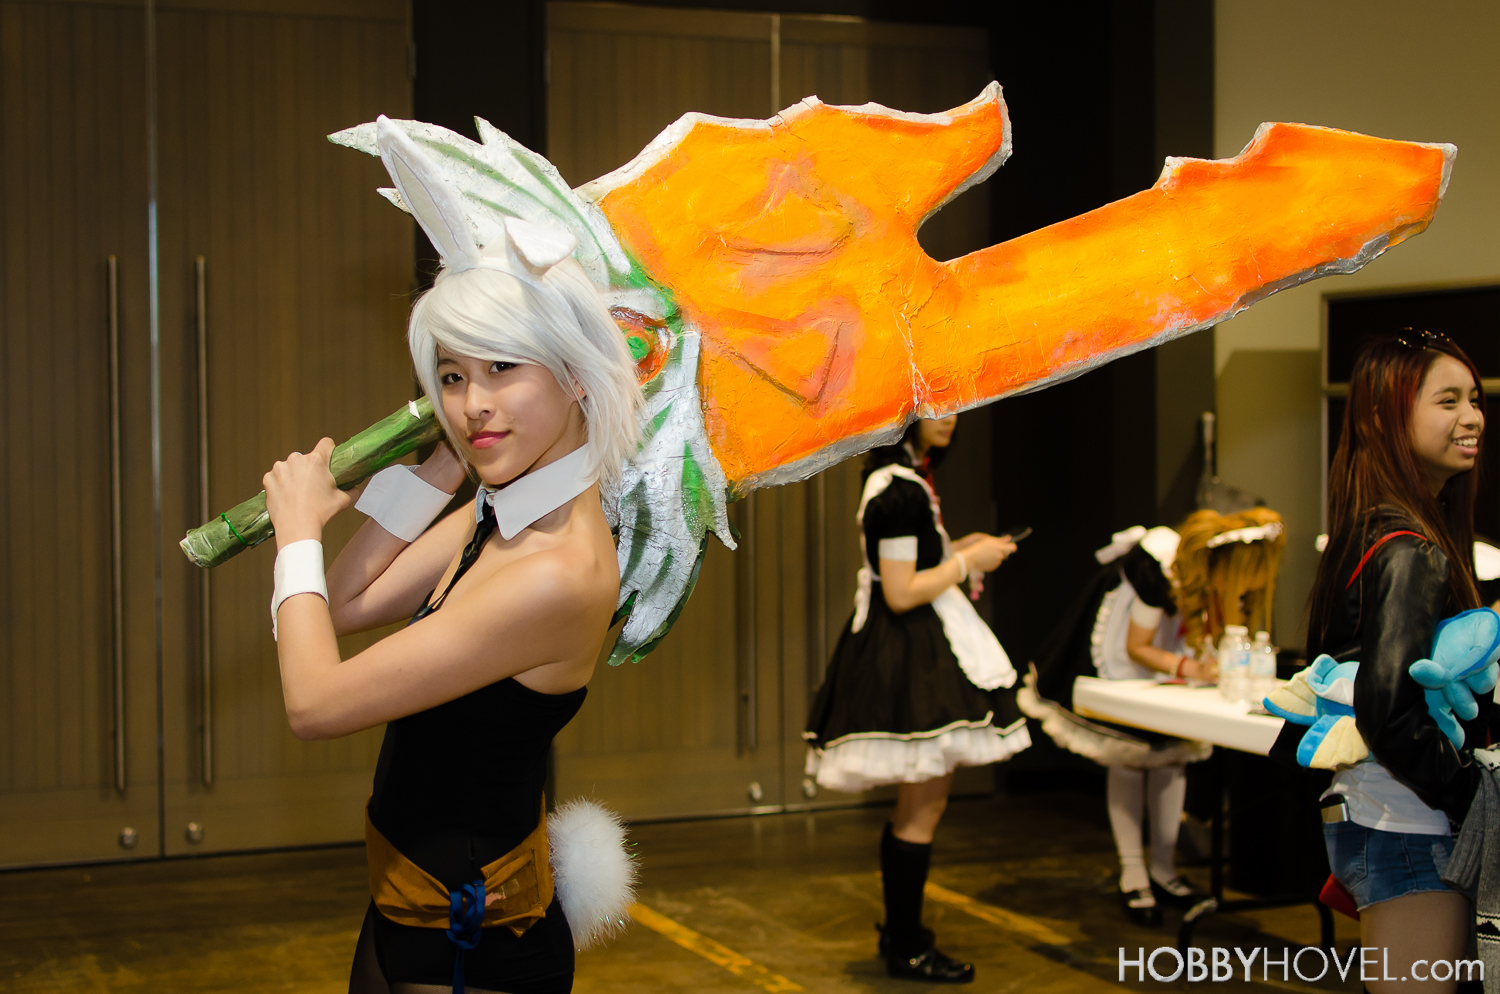 Battle bunny Riven Anime North 2013  Cosplay league of legends, Anime  north, Cosplay